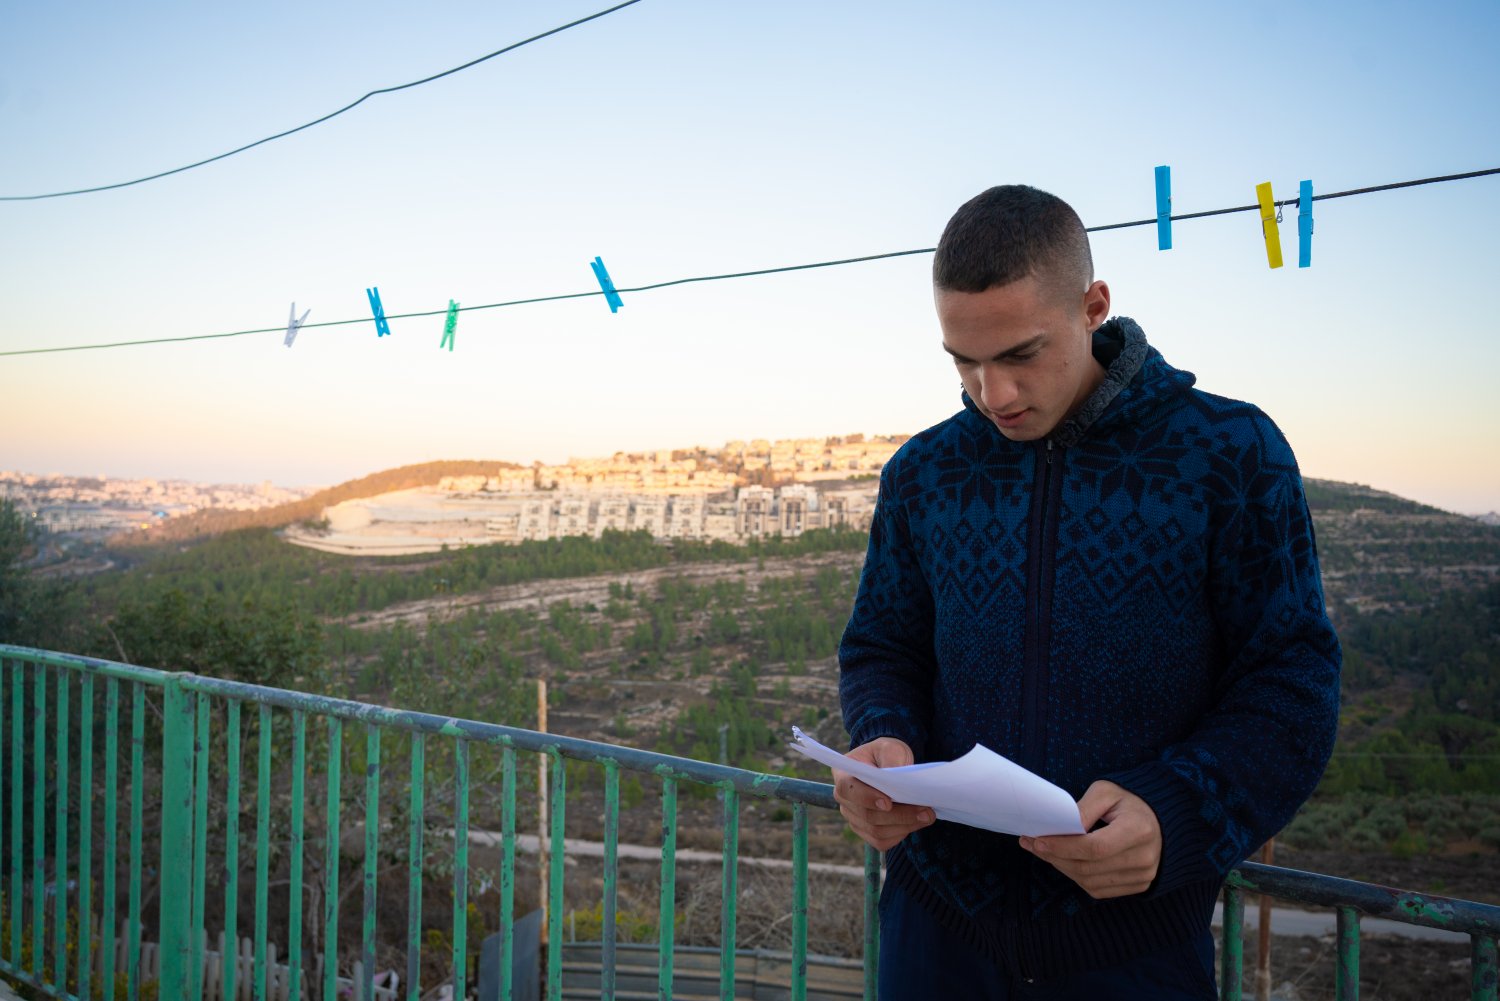 Omar Hajajla’s son, Anas, 18, studies on the ghettoized house’s balcony, with Gilo settlement visible behind him.